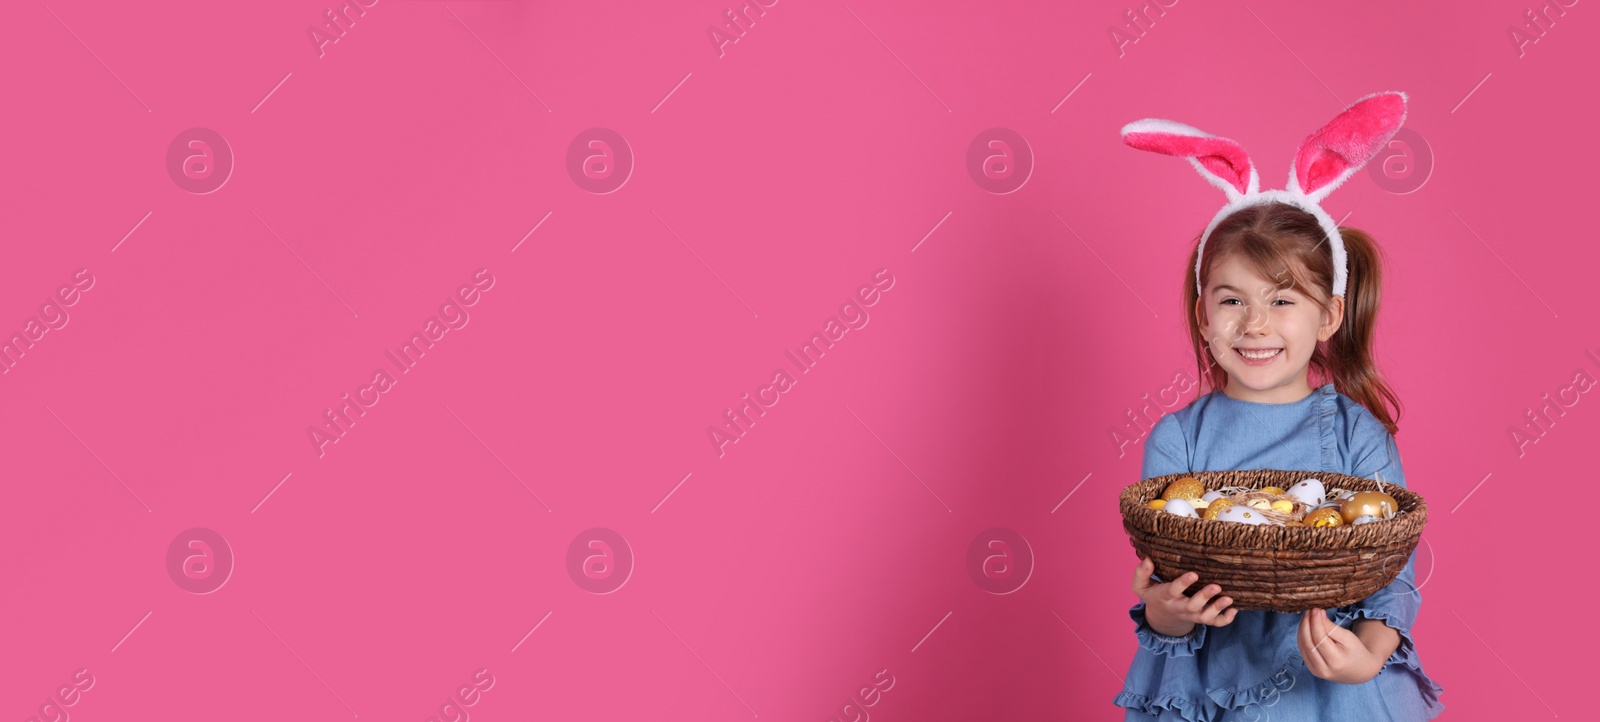 Photo of Happy little girl with bunny ears holding wicker basket full of Easter eggs on pink background. Space for text